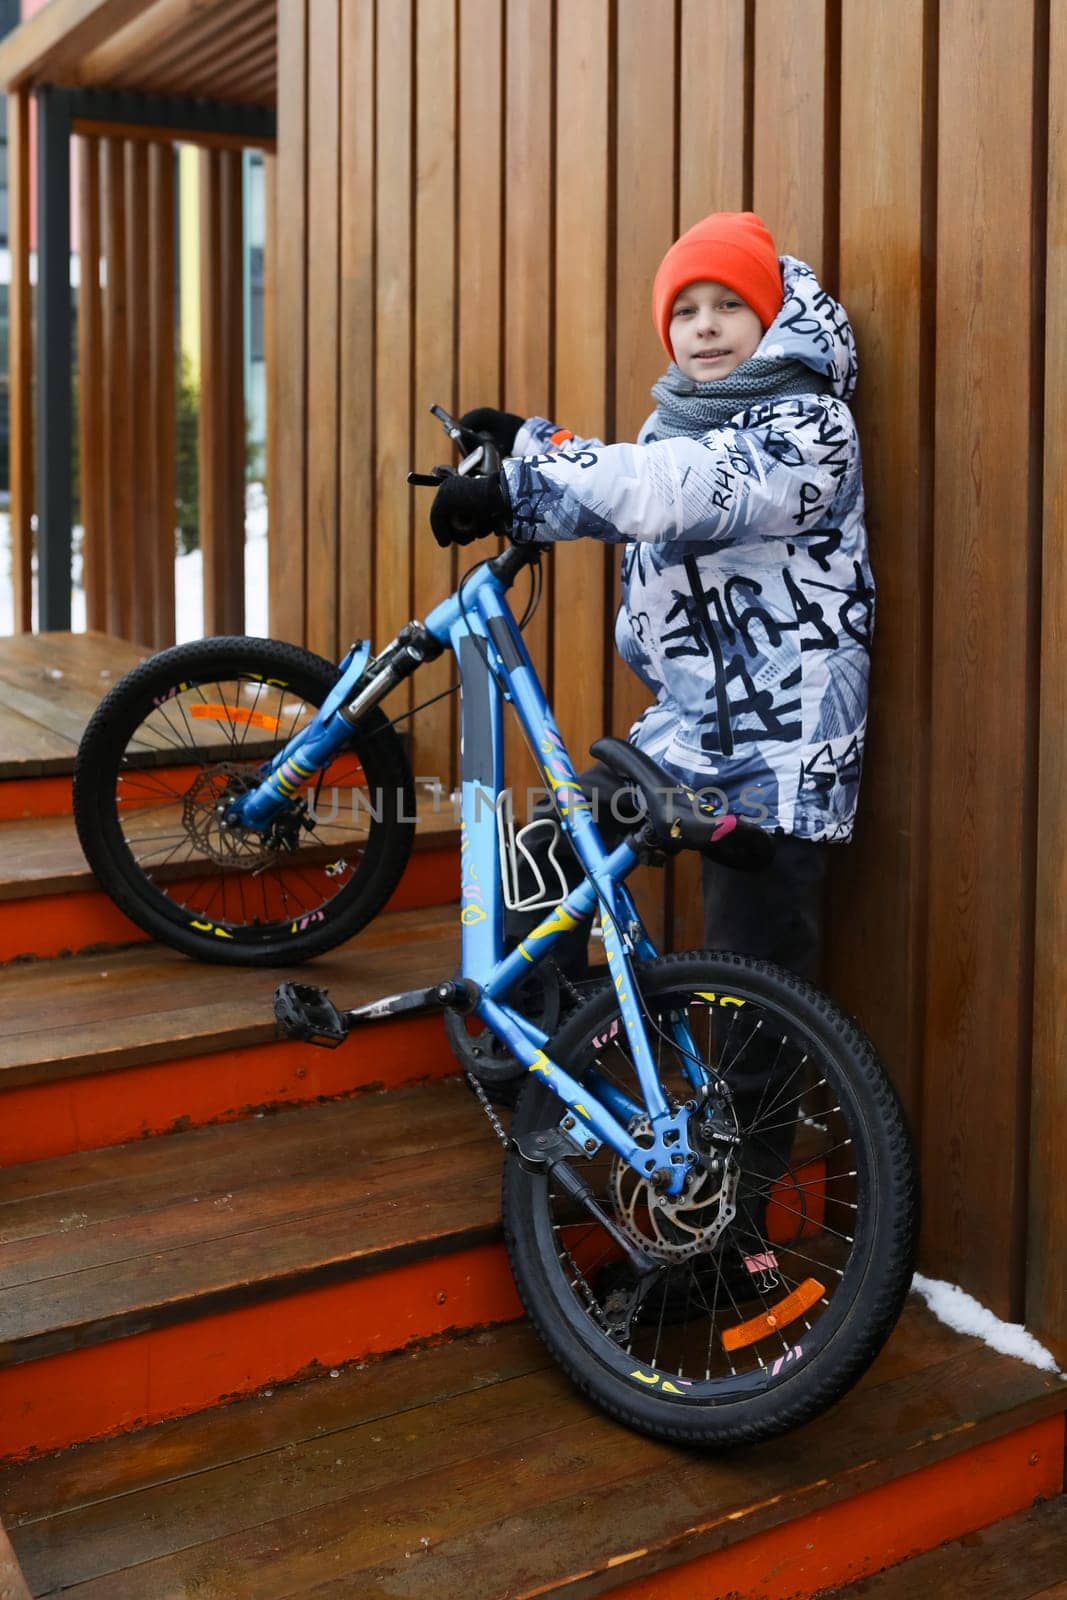 A boy in winter clothes rides a bicycle during the holidays by TRMK